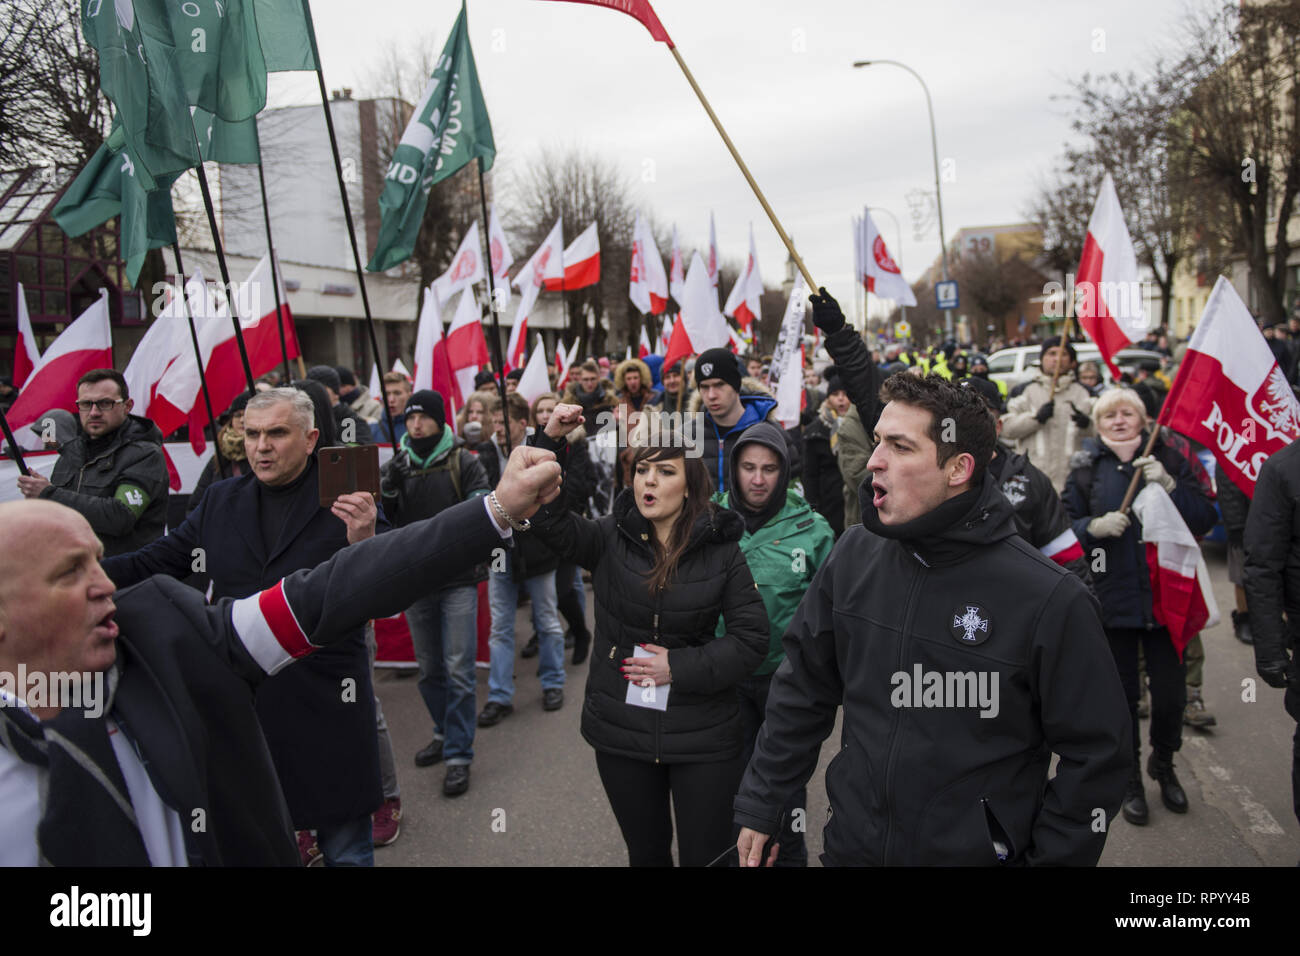 Hajnowka, Poldlaskie, Poland. 23rd Feb, 2019. Piotr Rybak a famous Polish nationalist is shouting some nationalist slogans during the march.Polish nationalists organized a commemorative march of the 'Cursed Soldiers'' in the city of Hajnowka next to the Belarusian border. The Cursed Soldiers also known as the Doomed Soldiers were anti-communist resistant fighters after WWII, however they were also famous of committing crimes against civilians, mostly ethnic Belarusians. Credit: Attila Husejnow/SOPA Images/ZUMA Wire/Alamy Live News Stock Photo